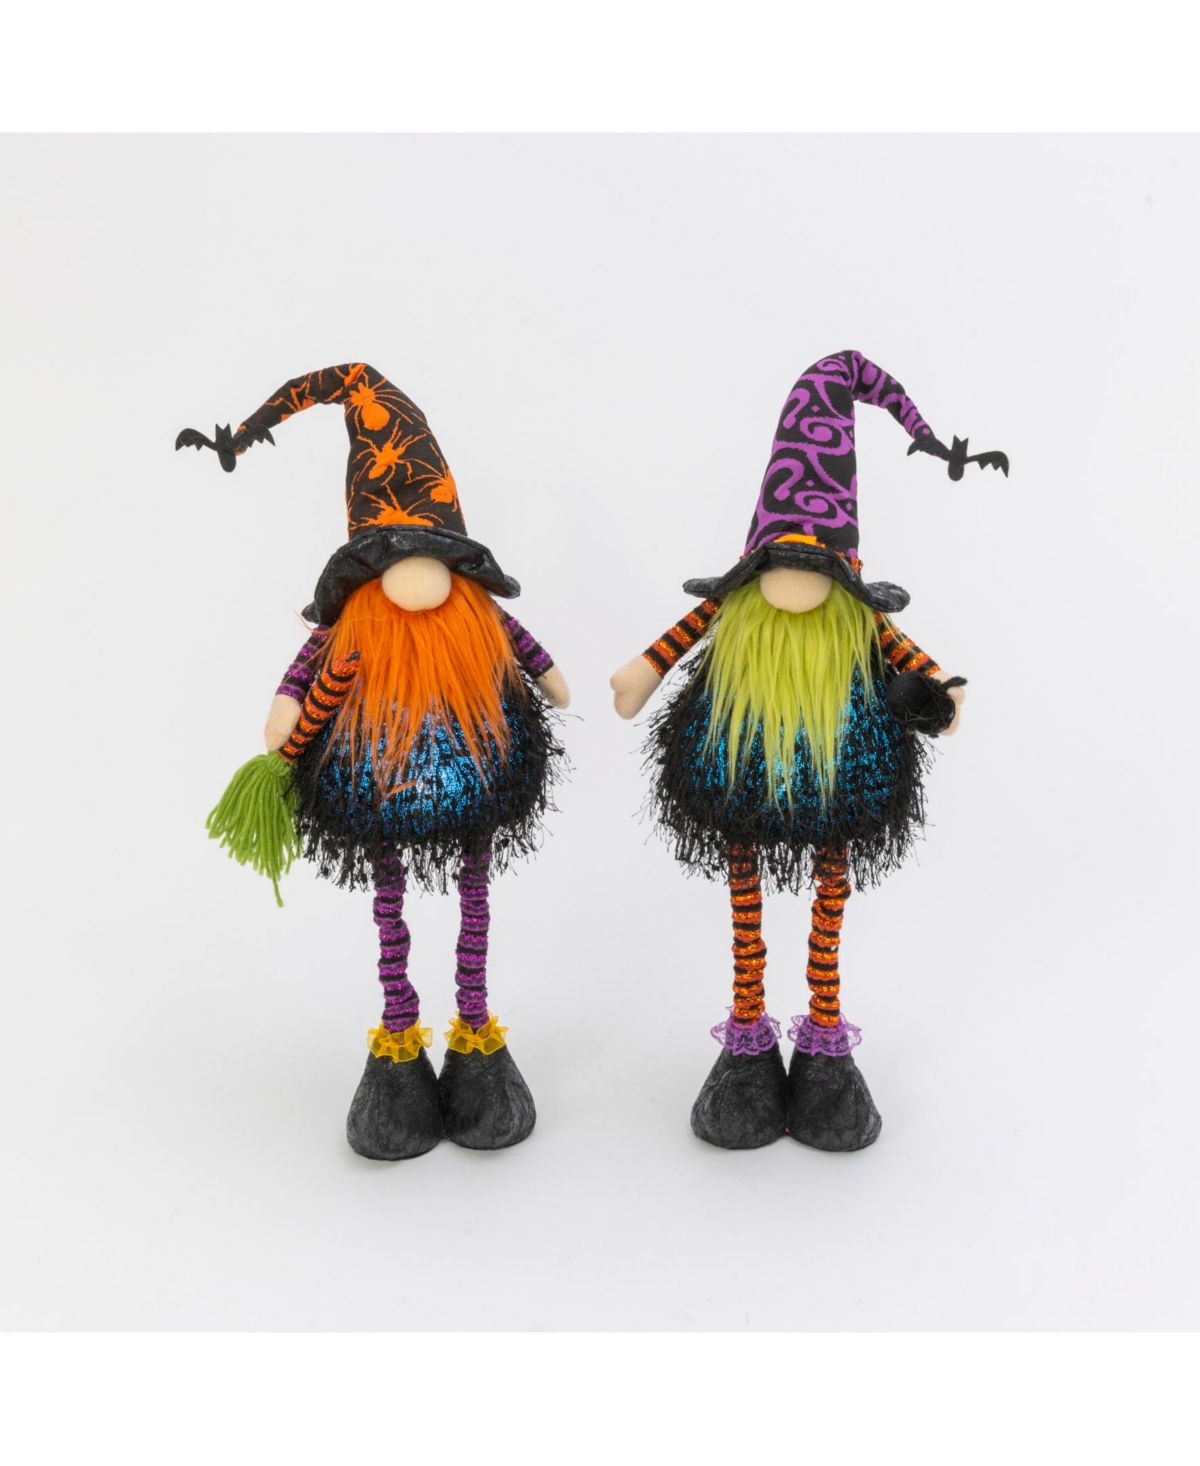 Set of 2 Lighted Plush Standing Spooky Halloween Gnomes - Multicolor